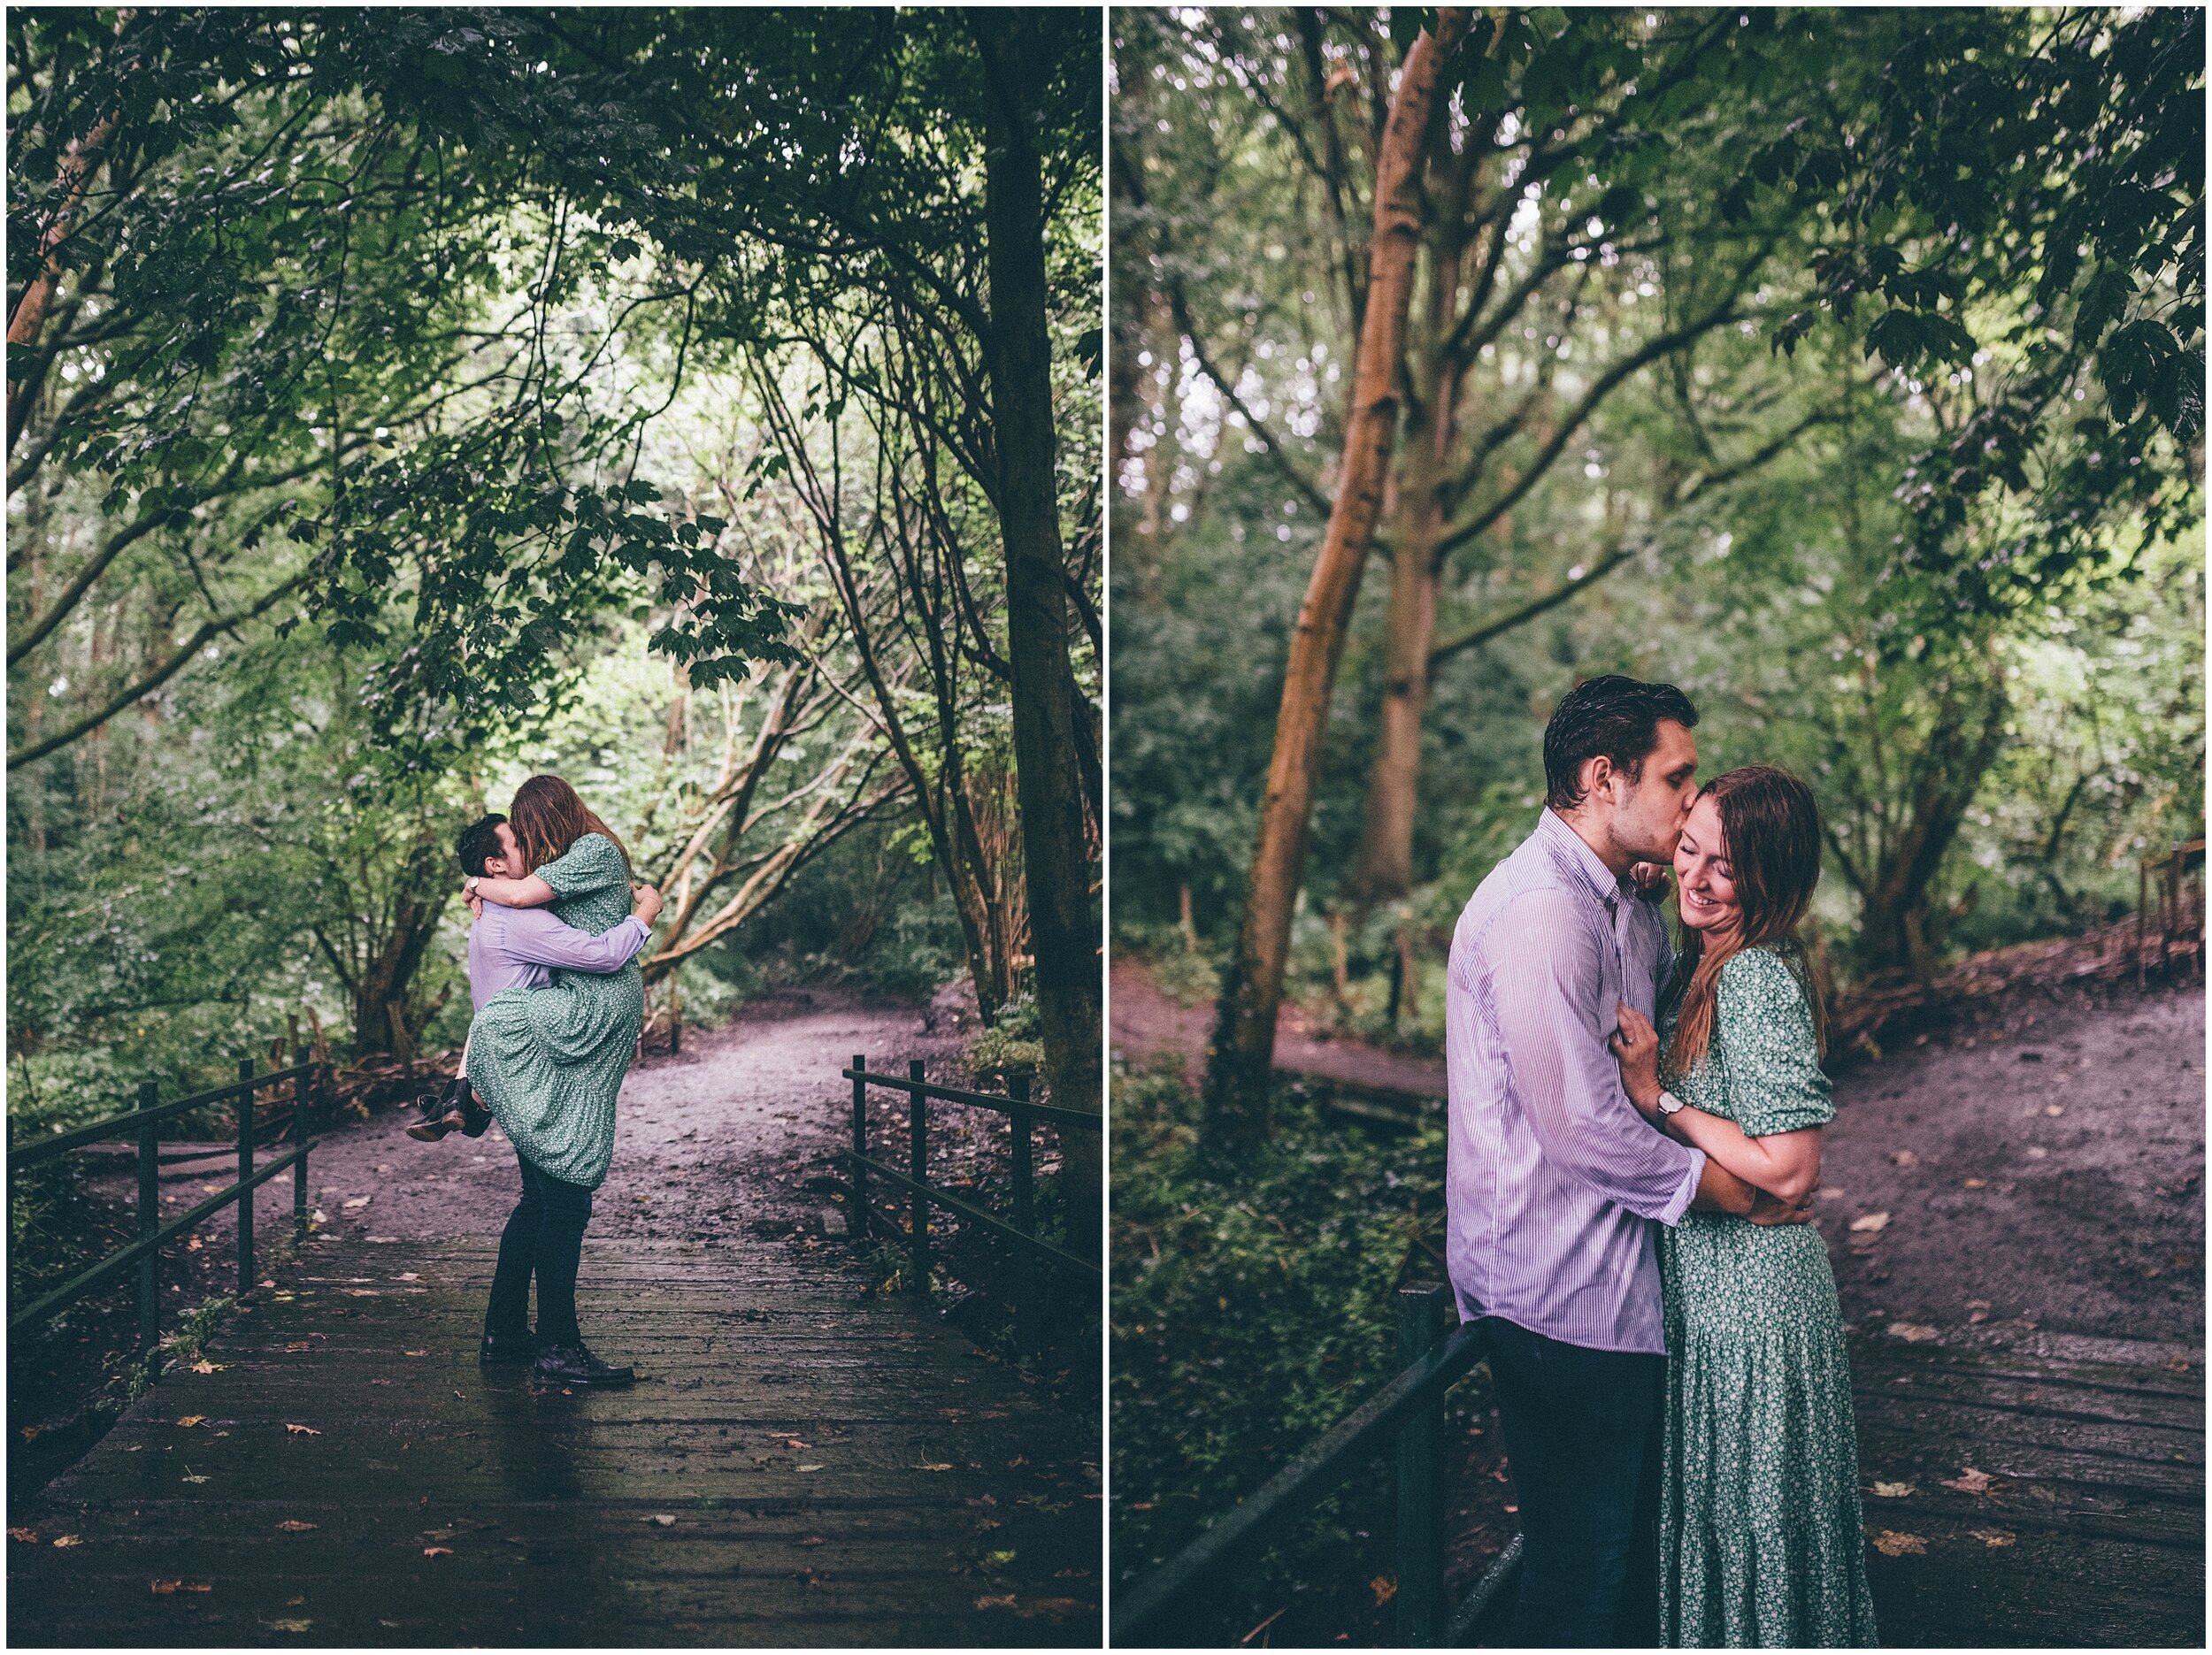 Rain storm photo shoot in Cheshire forest with cute couple.